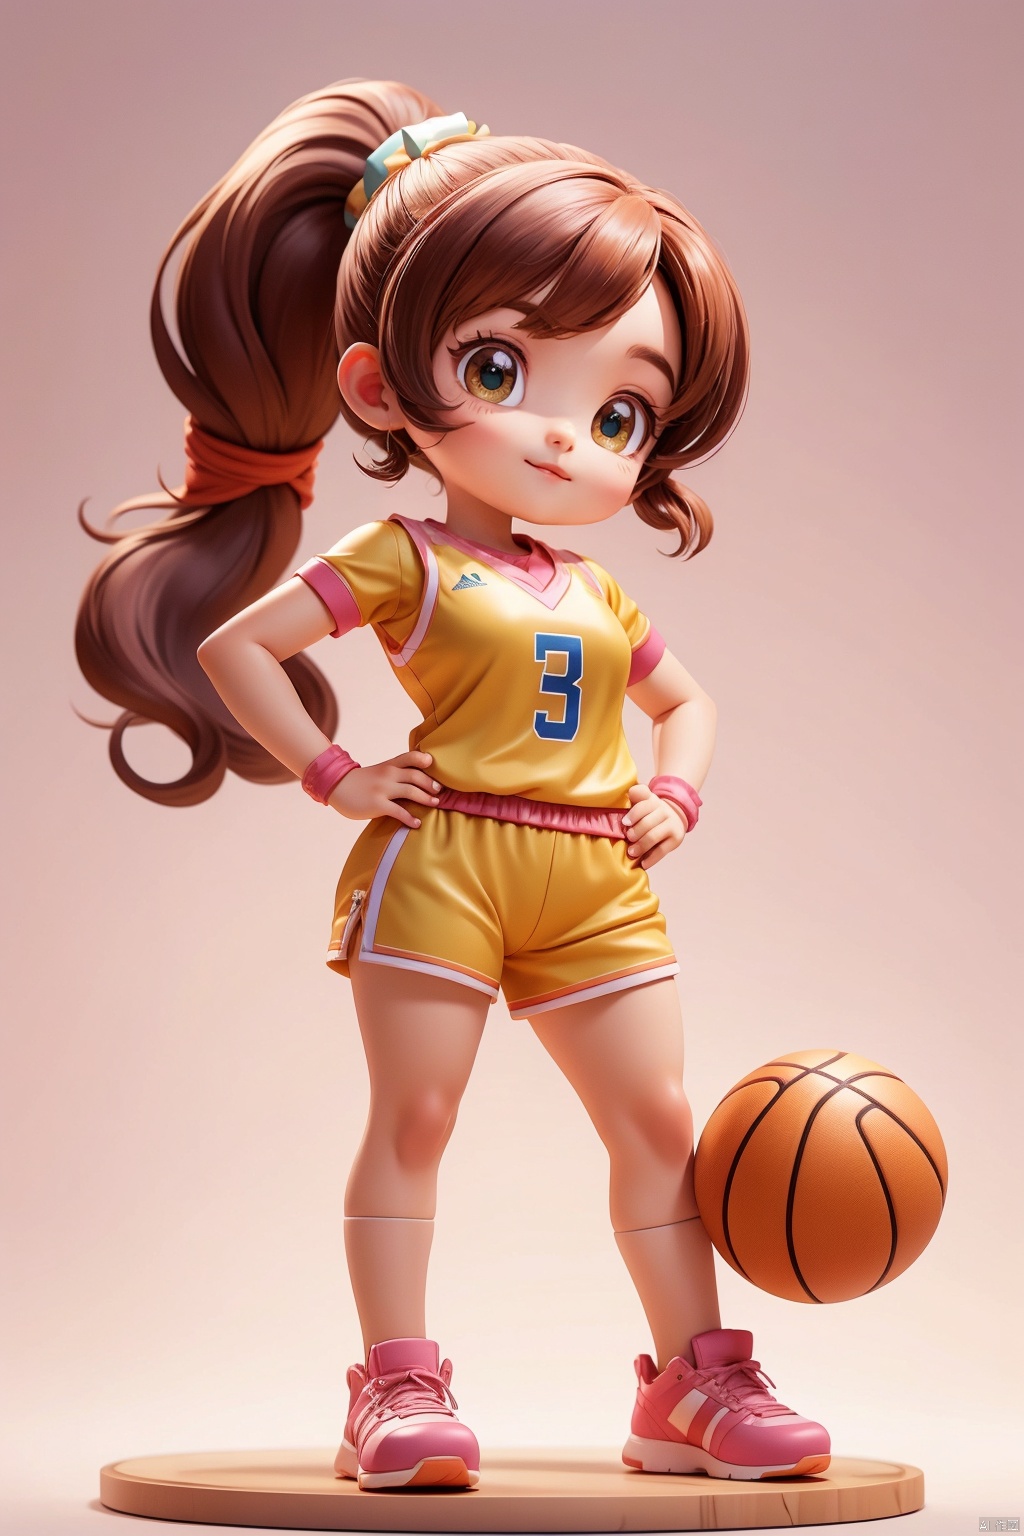 1 girl, animal IP, solo, (Q version :1.2), firm expression, sheep horns, animal mouth, blush, basketball uniform, simple background, pink, woven ponytail, hands on hips